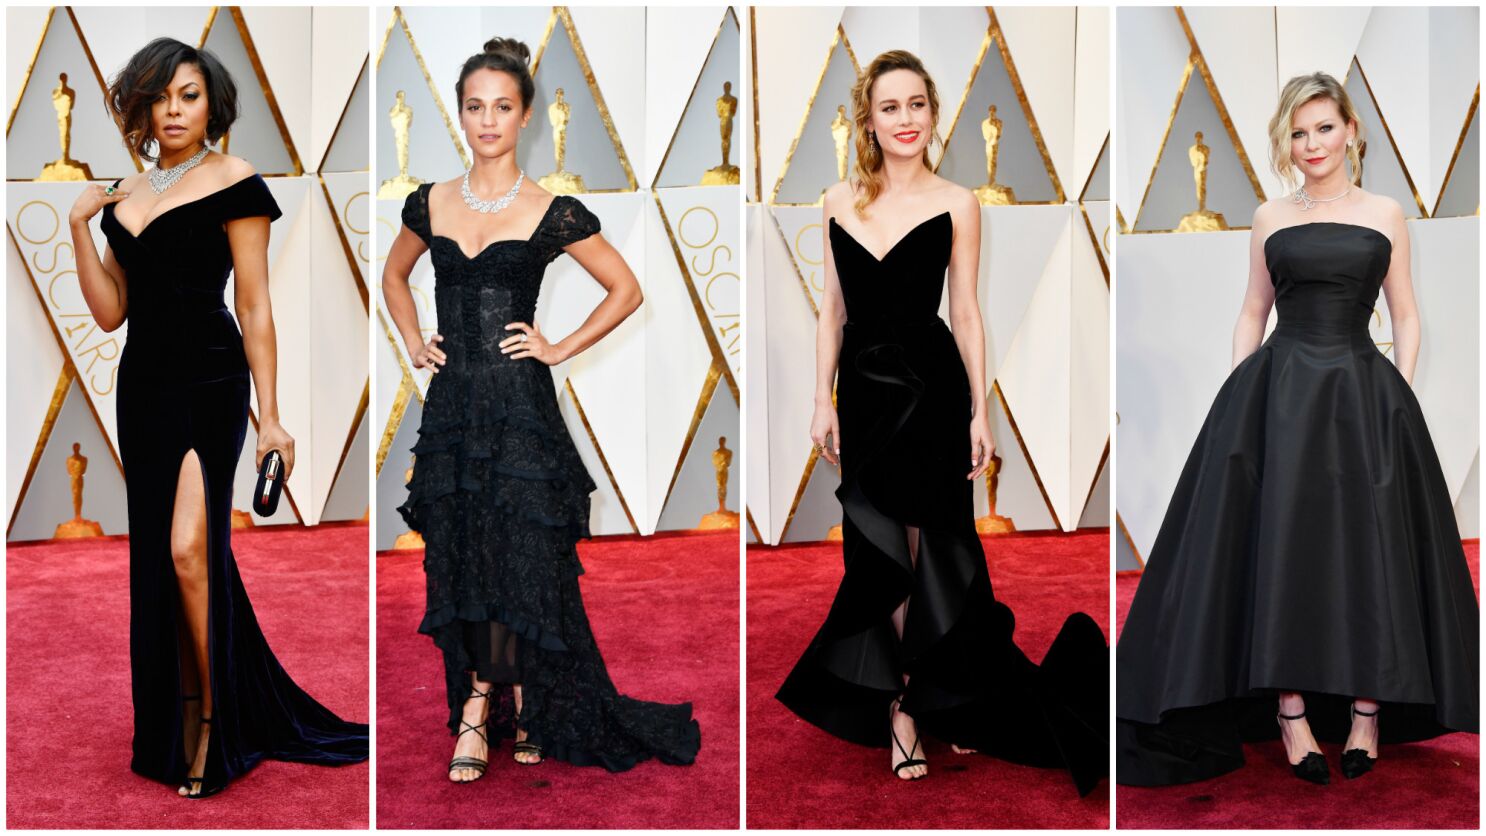 A retro rewind and glamorous gowns for the ages at the Oscars